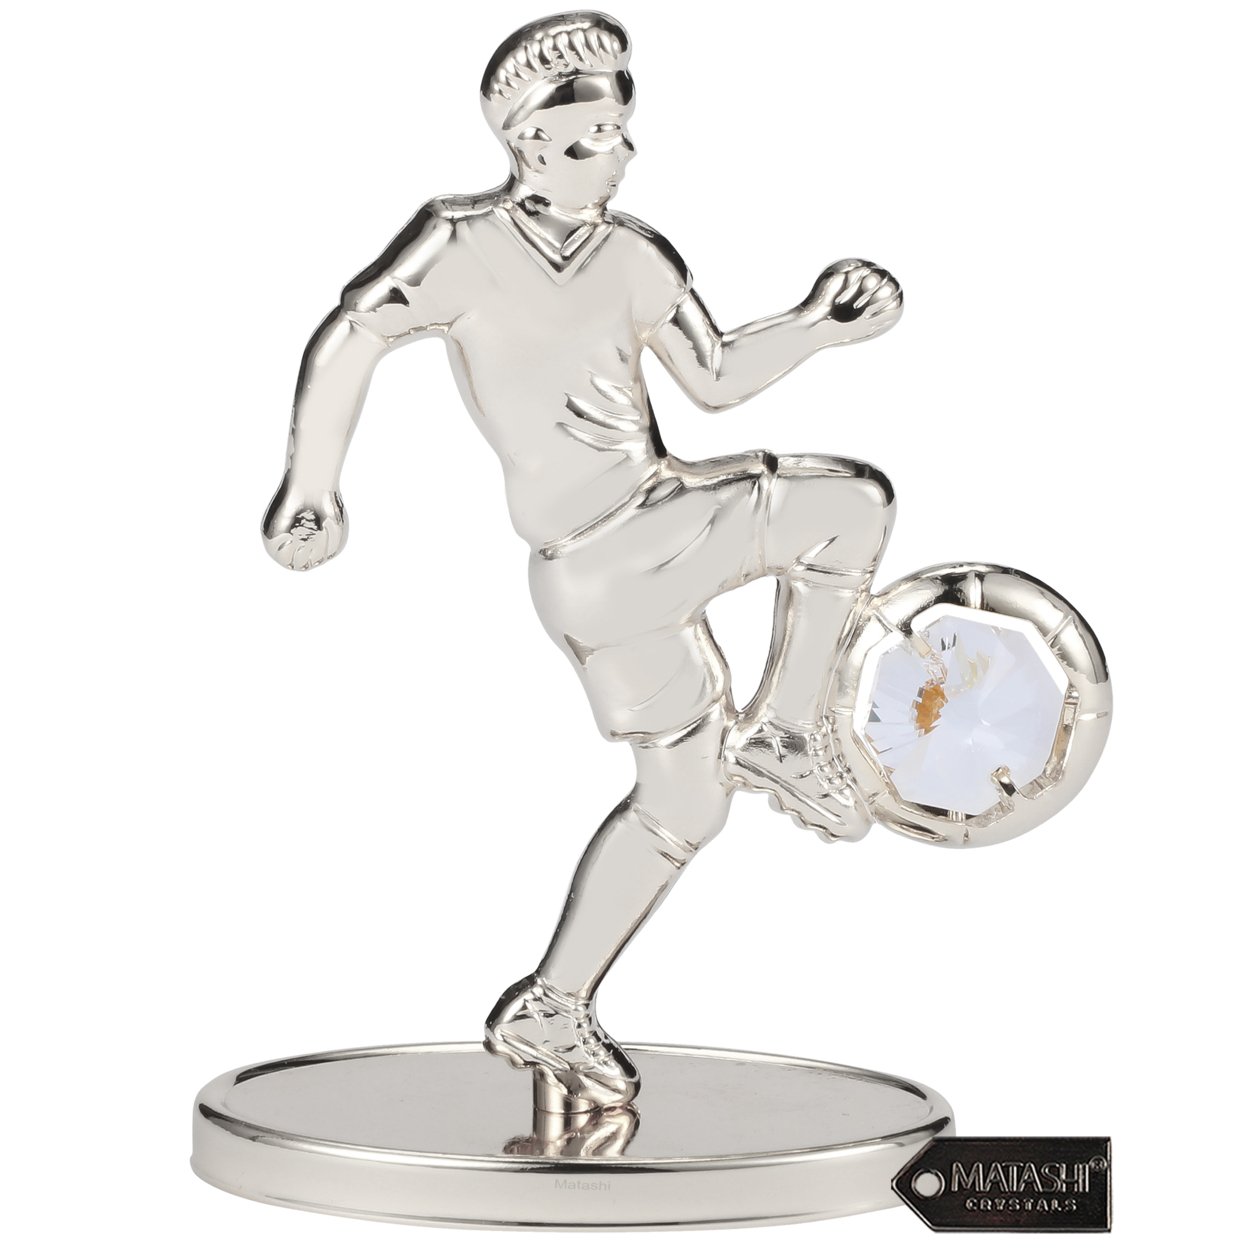 Matashi Silver Plated Soccer Football Player Figurine With Crystals Gift For Sports Fan, Desk Accessories, Trophy, Boss Gift, Office Decor